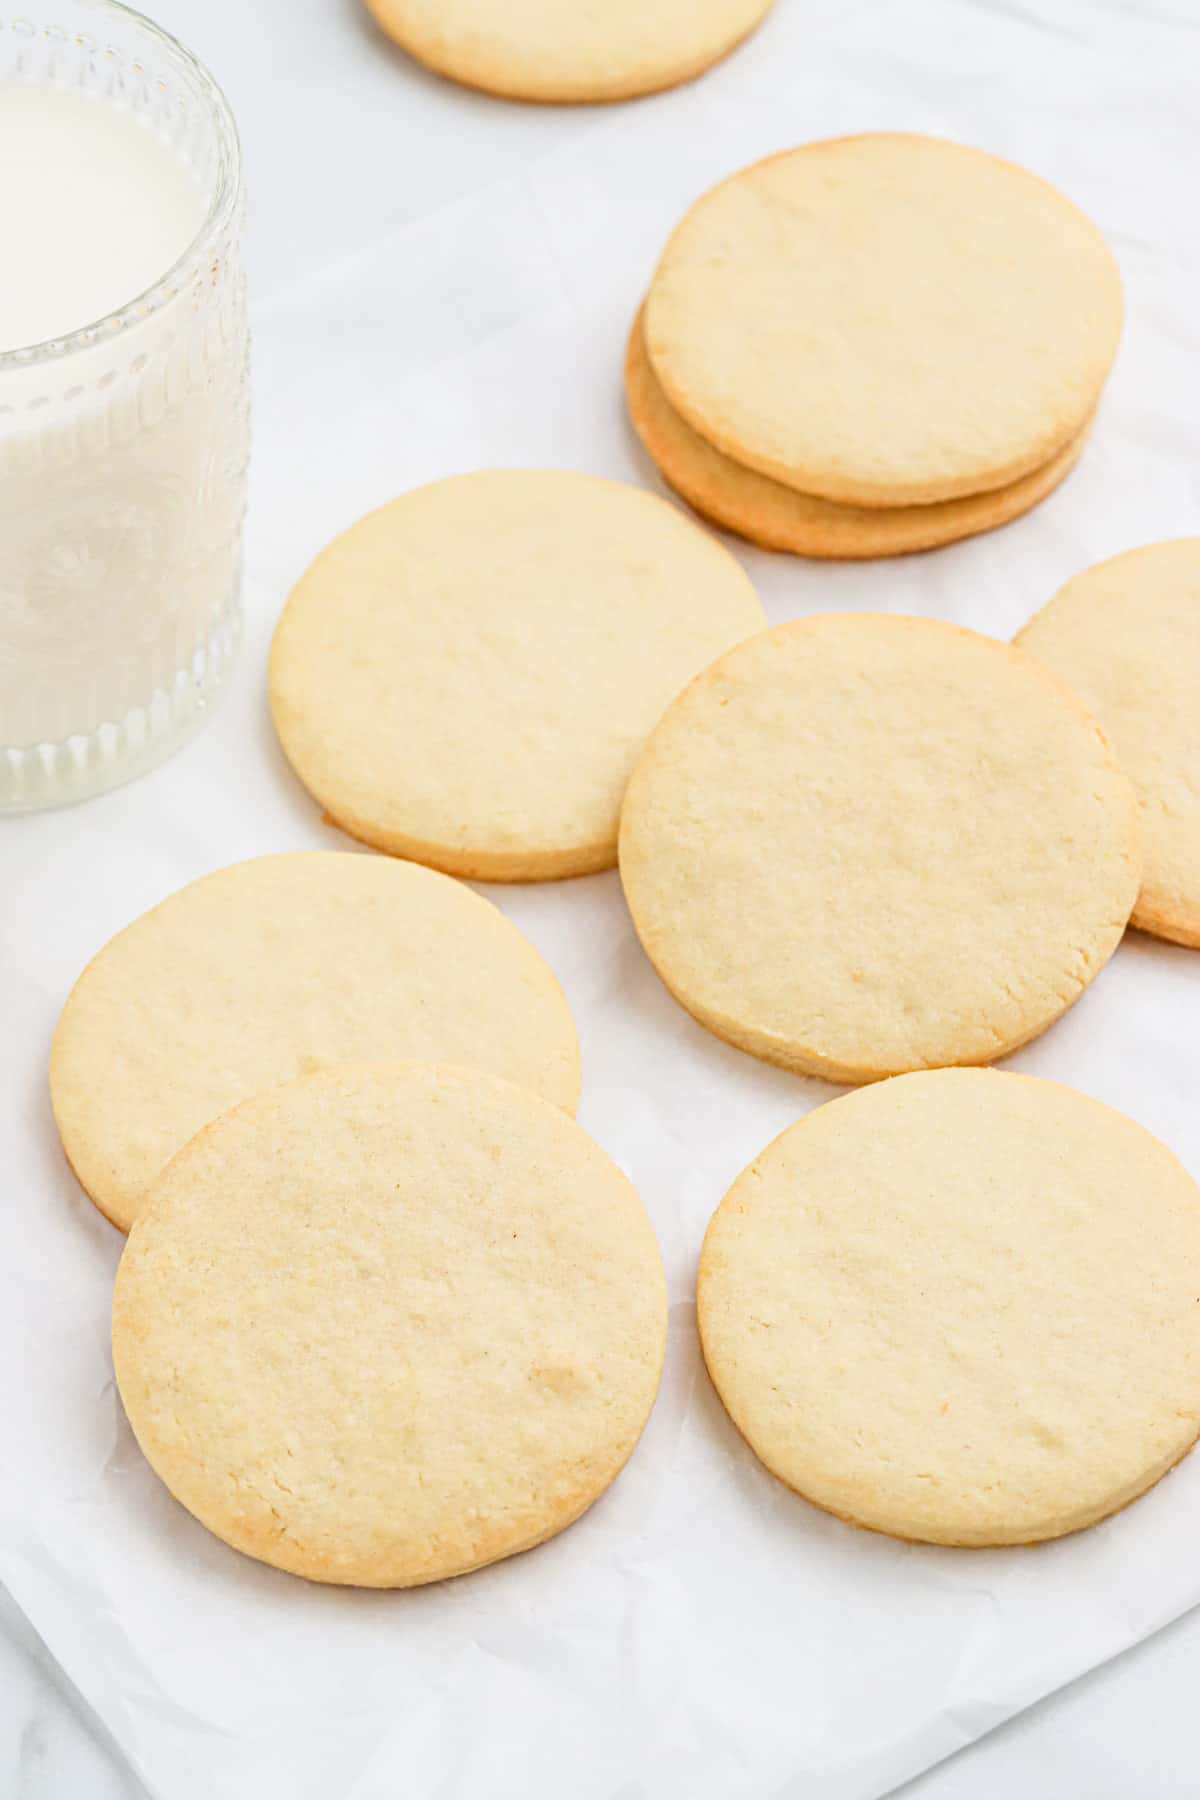 Plain sugar cookies on the table with a glass of milk.